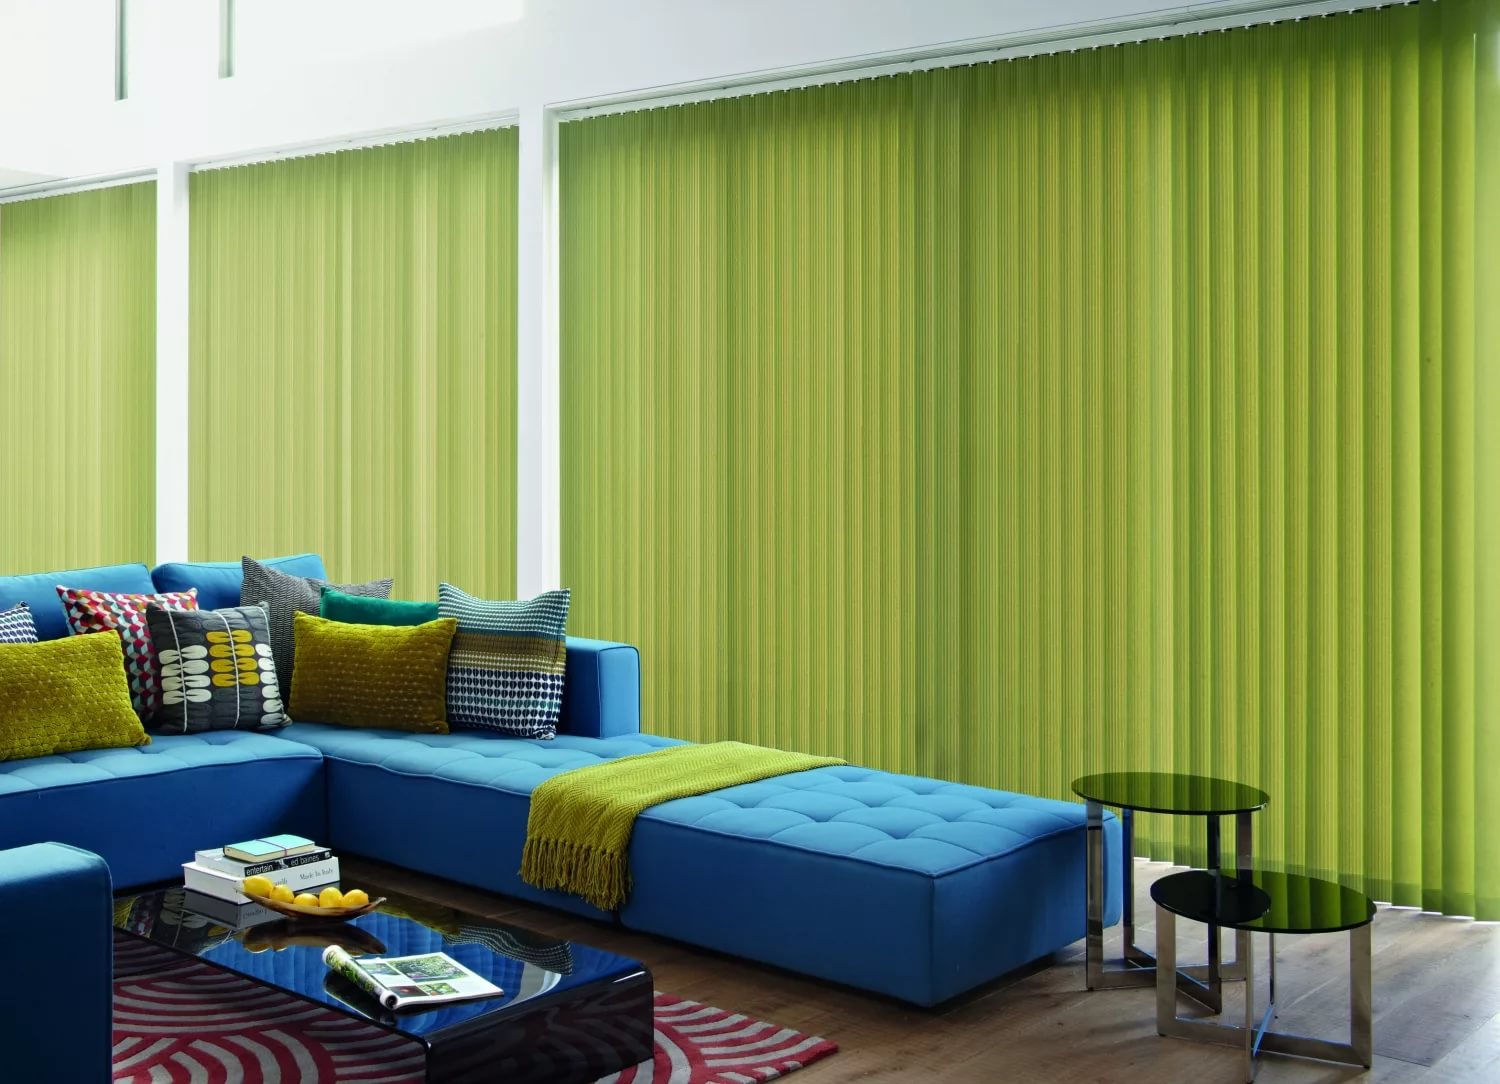 Blue sofa in the living room with green curtains